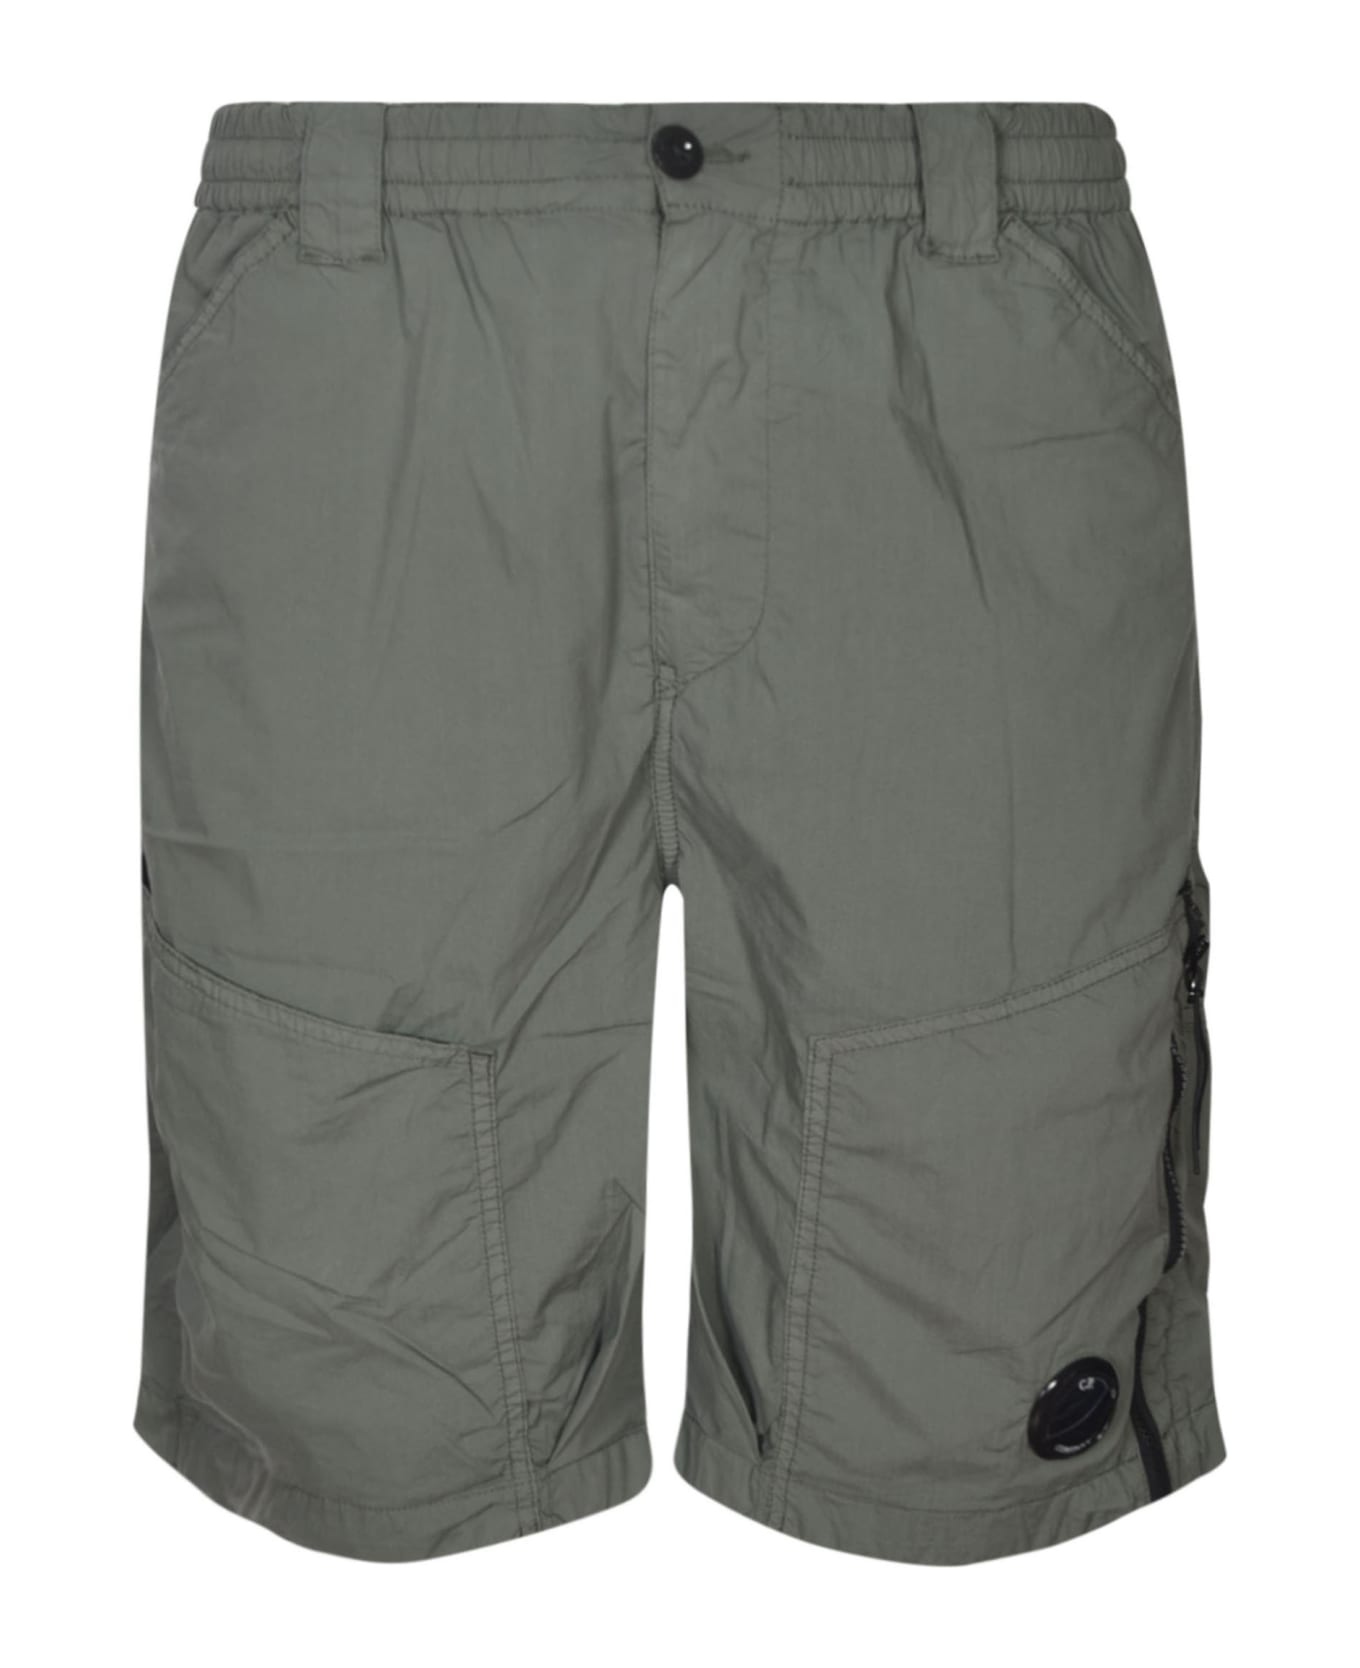 C.P. Company Elastic Buttoned Waist Cargo Shorts - Agave Green